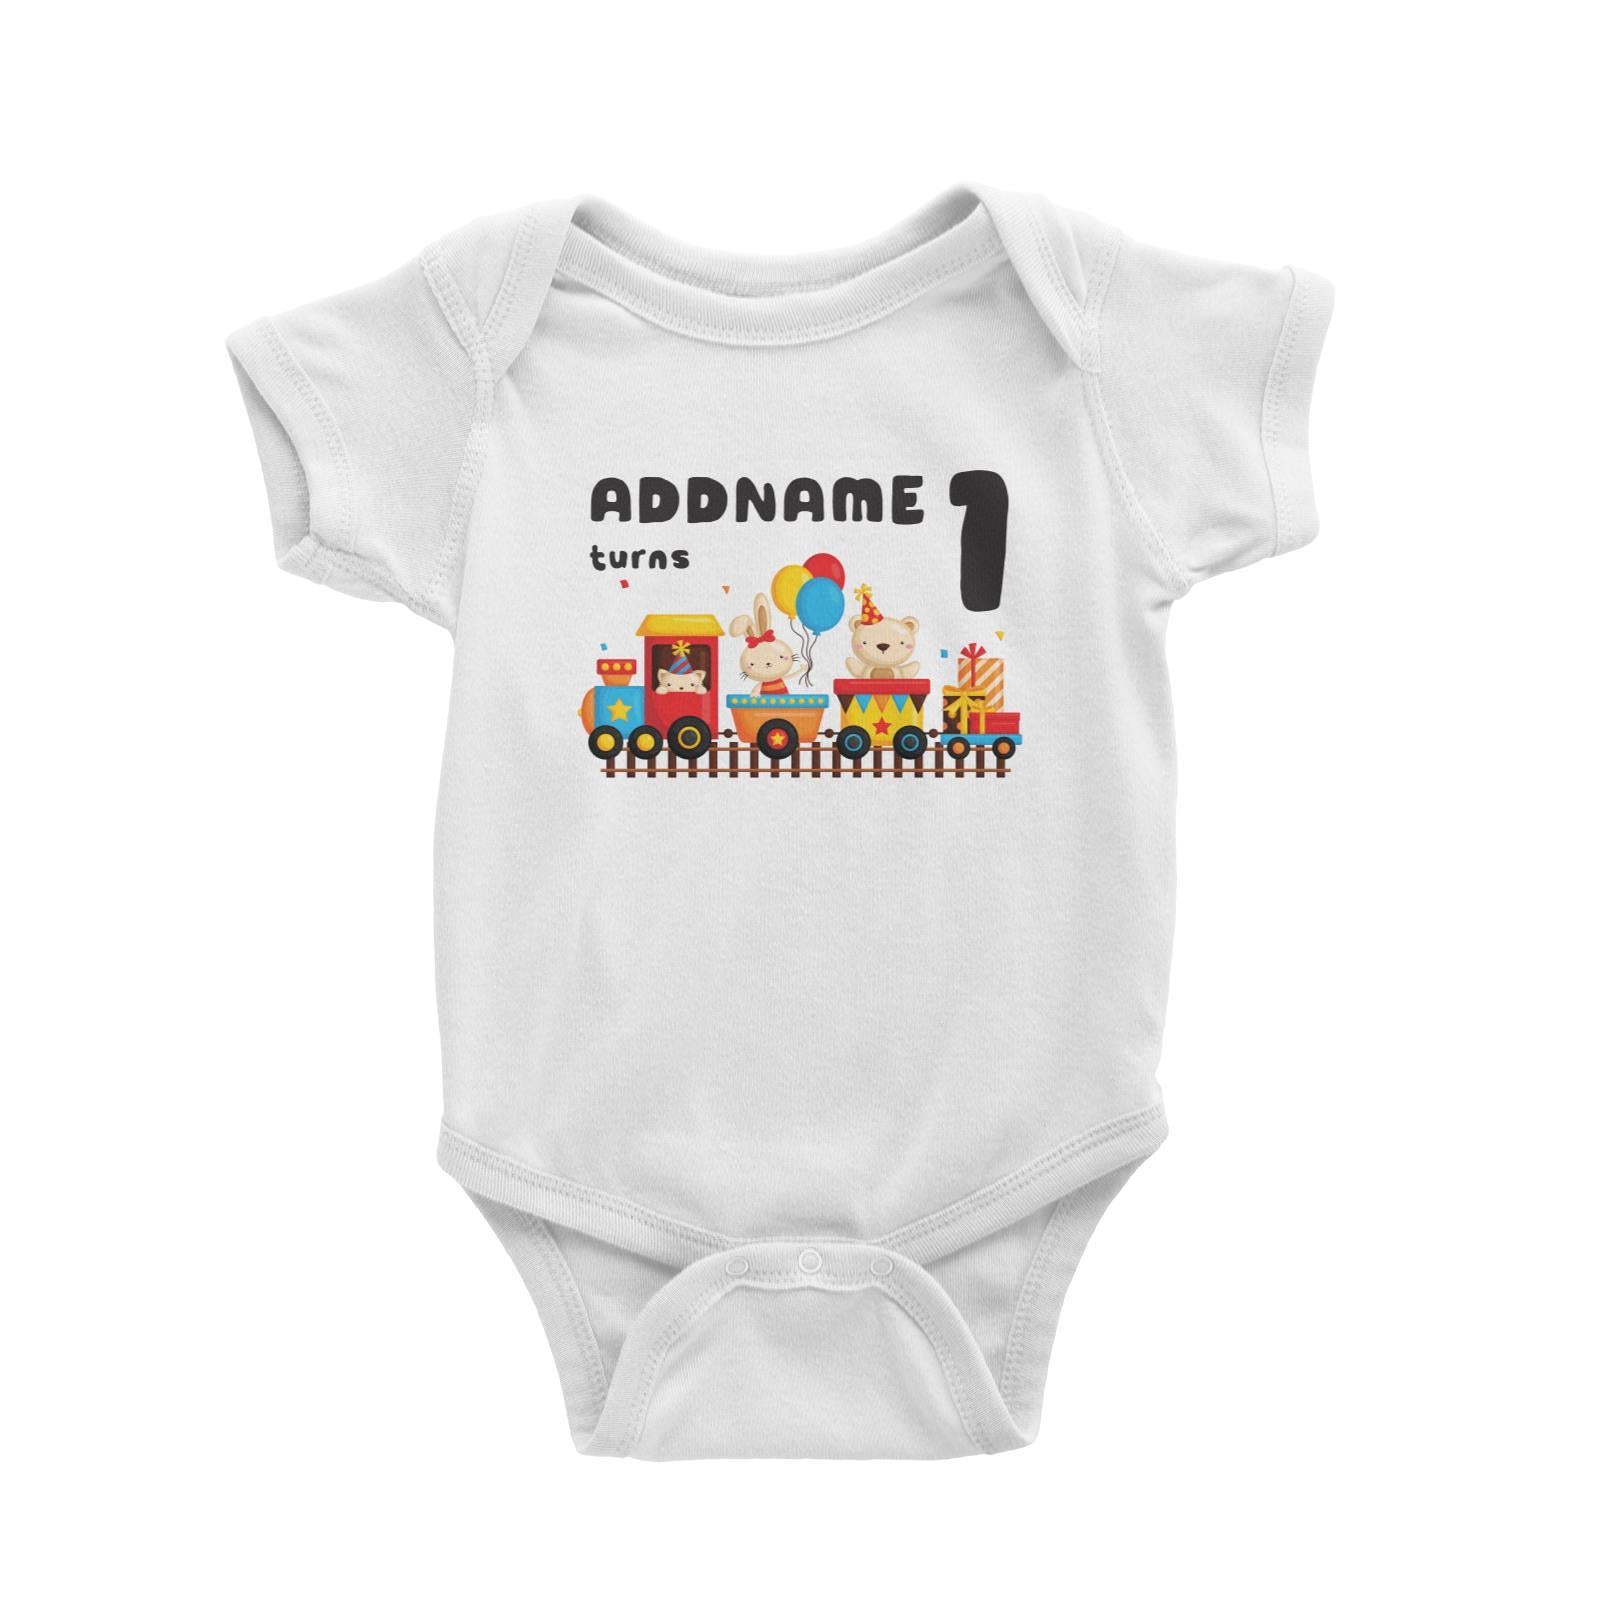 Birthday Fun Train And Animals Group Addname Turns 1 Baby Romper